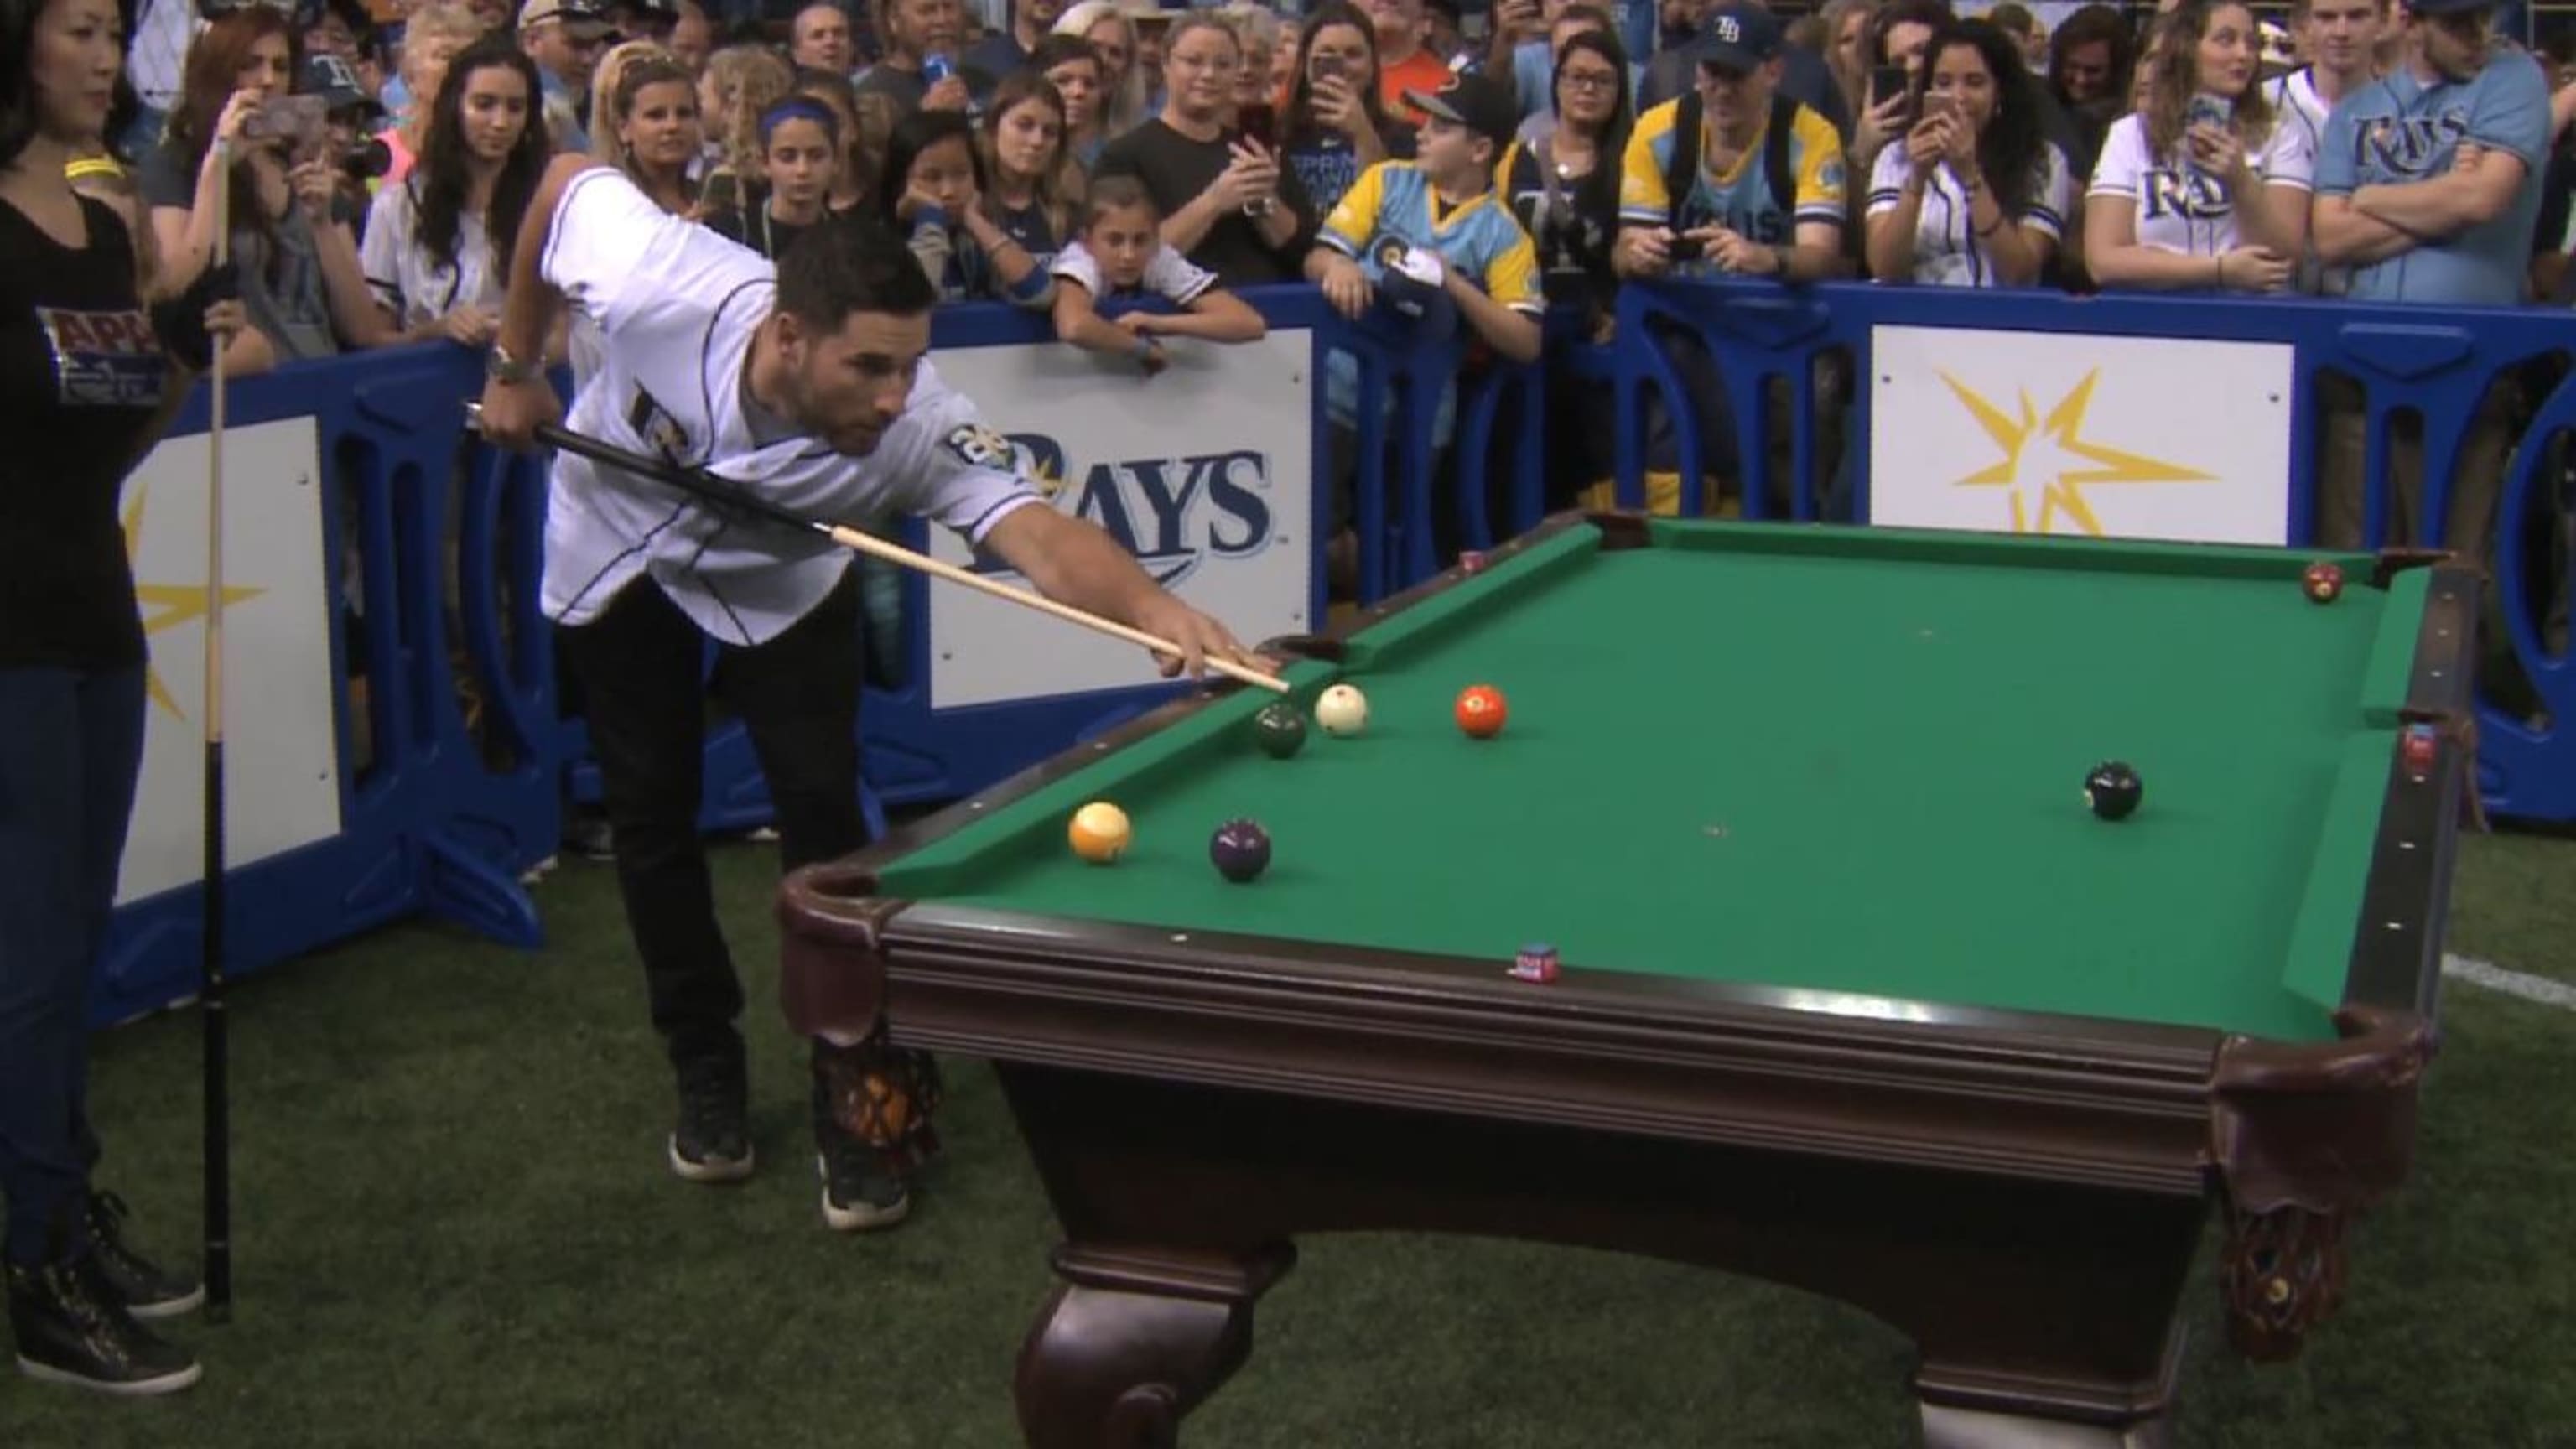 Kevin Kiermaier held his own against professional pool player Jeanette Lee at Rays FanFest MLB